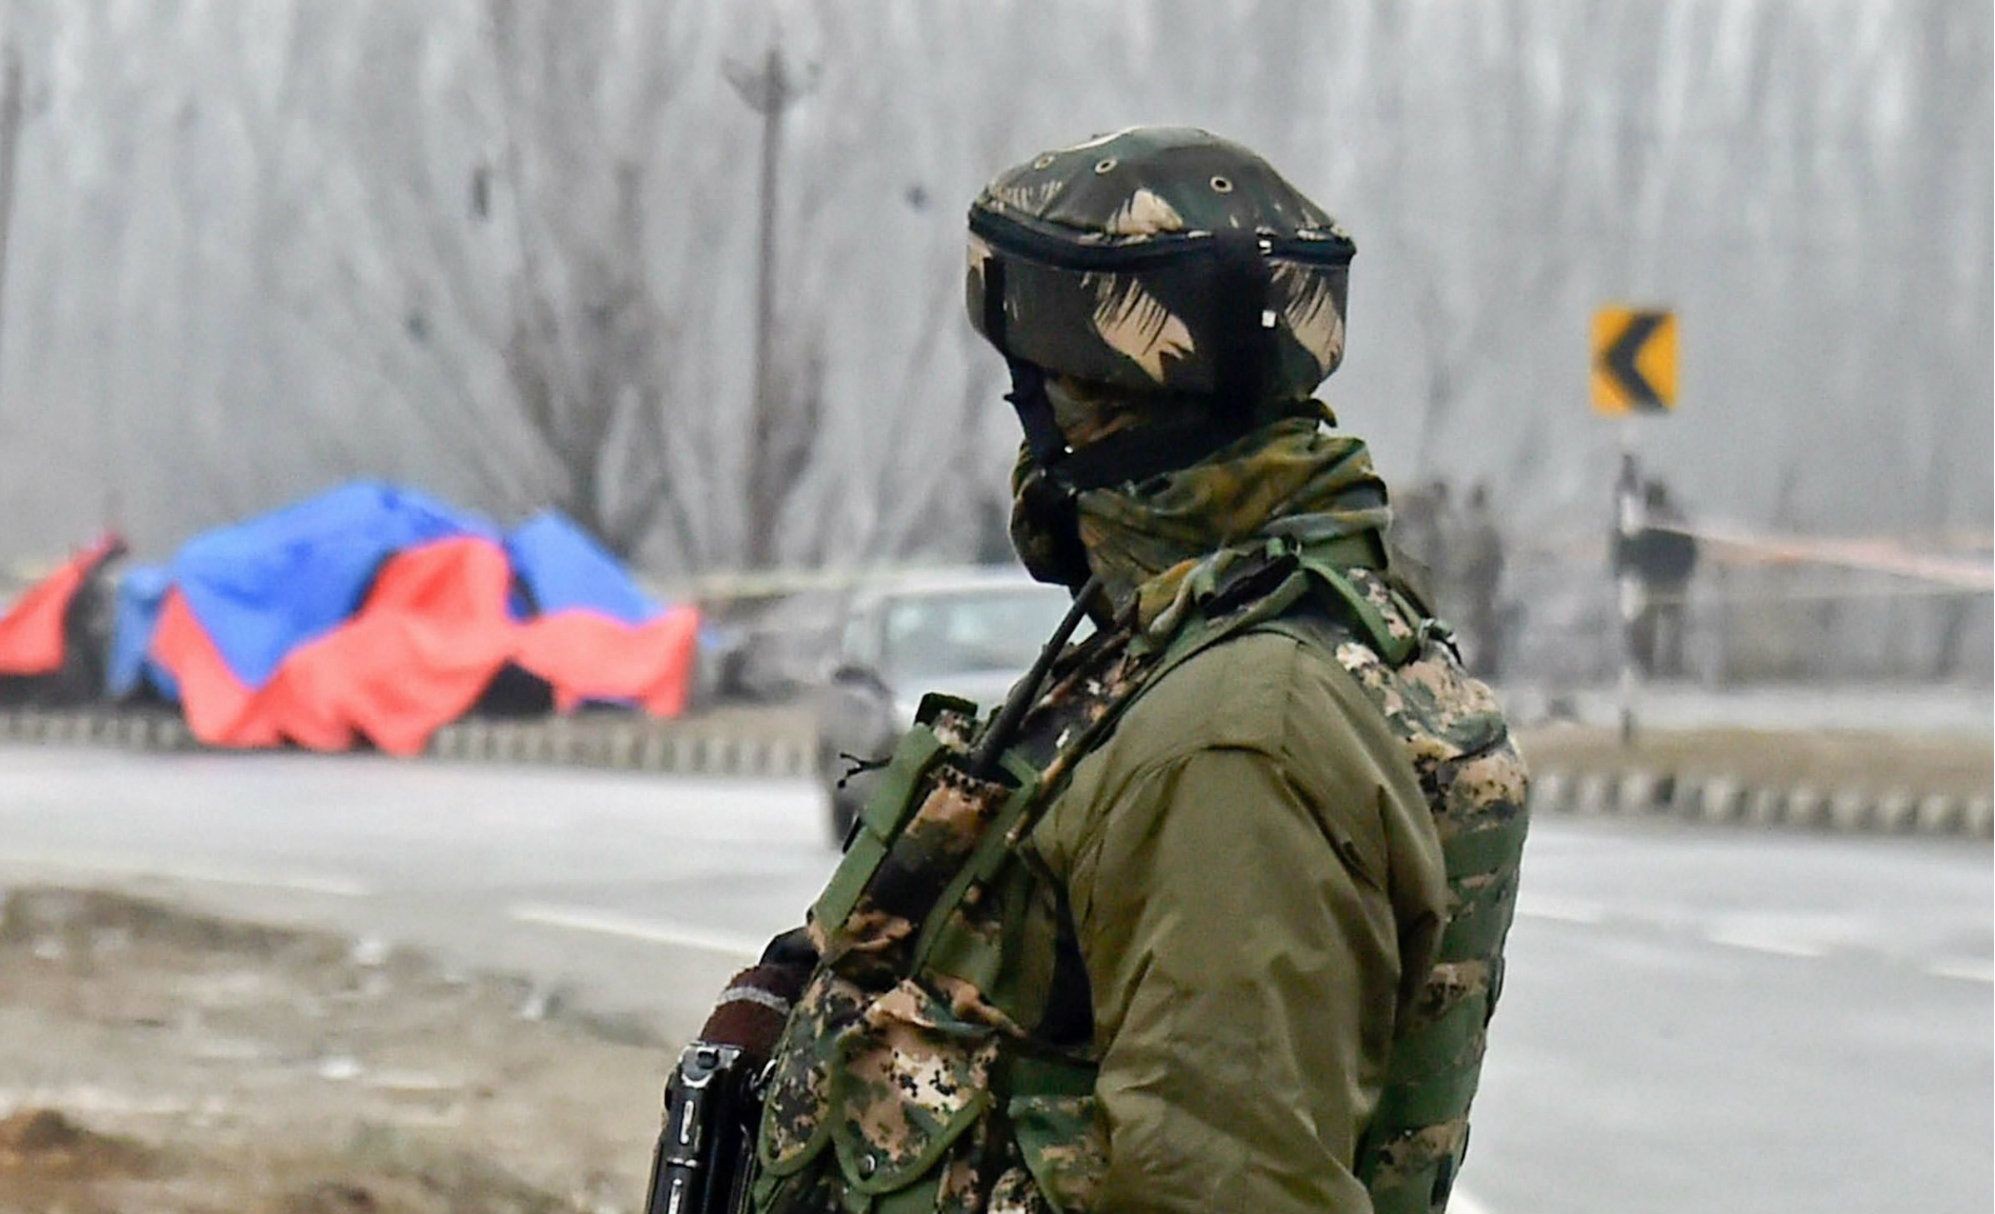 A jawan stands guard at the site of the suicide bomb attack in Pulwama district on Friday.